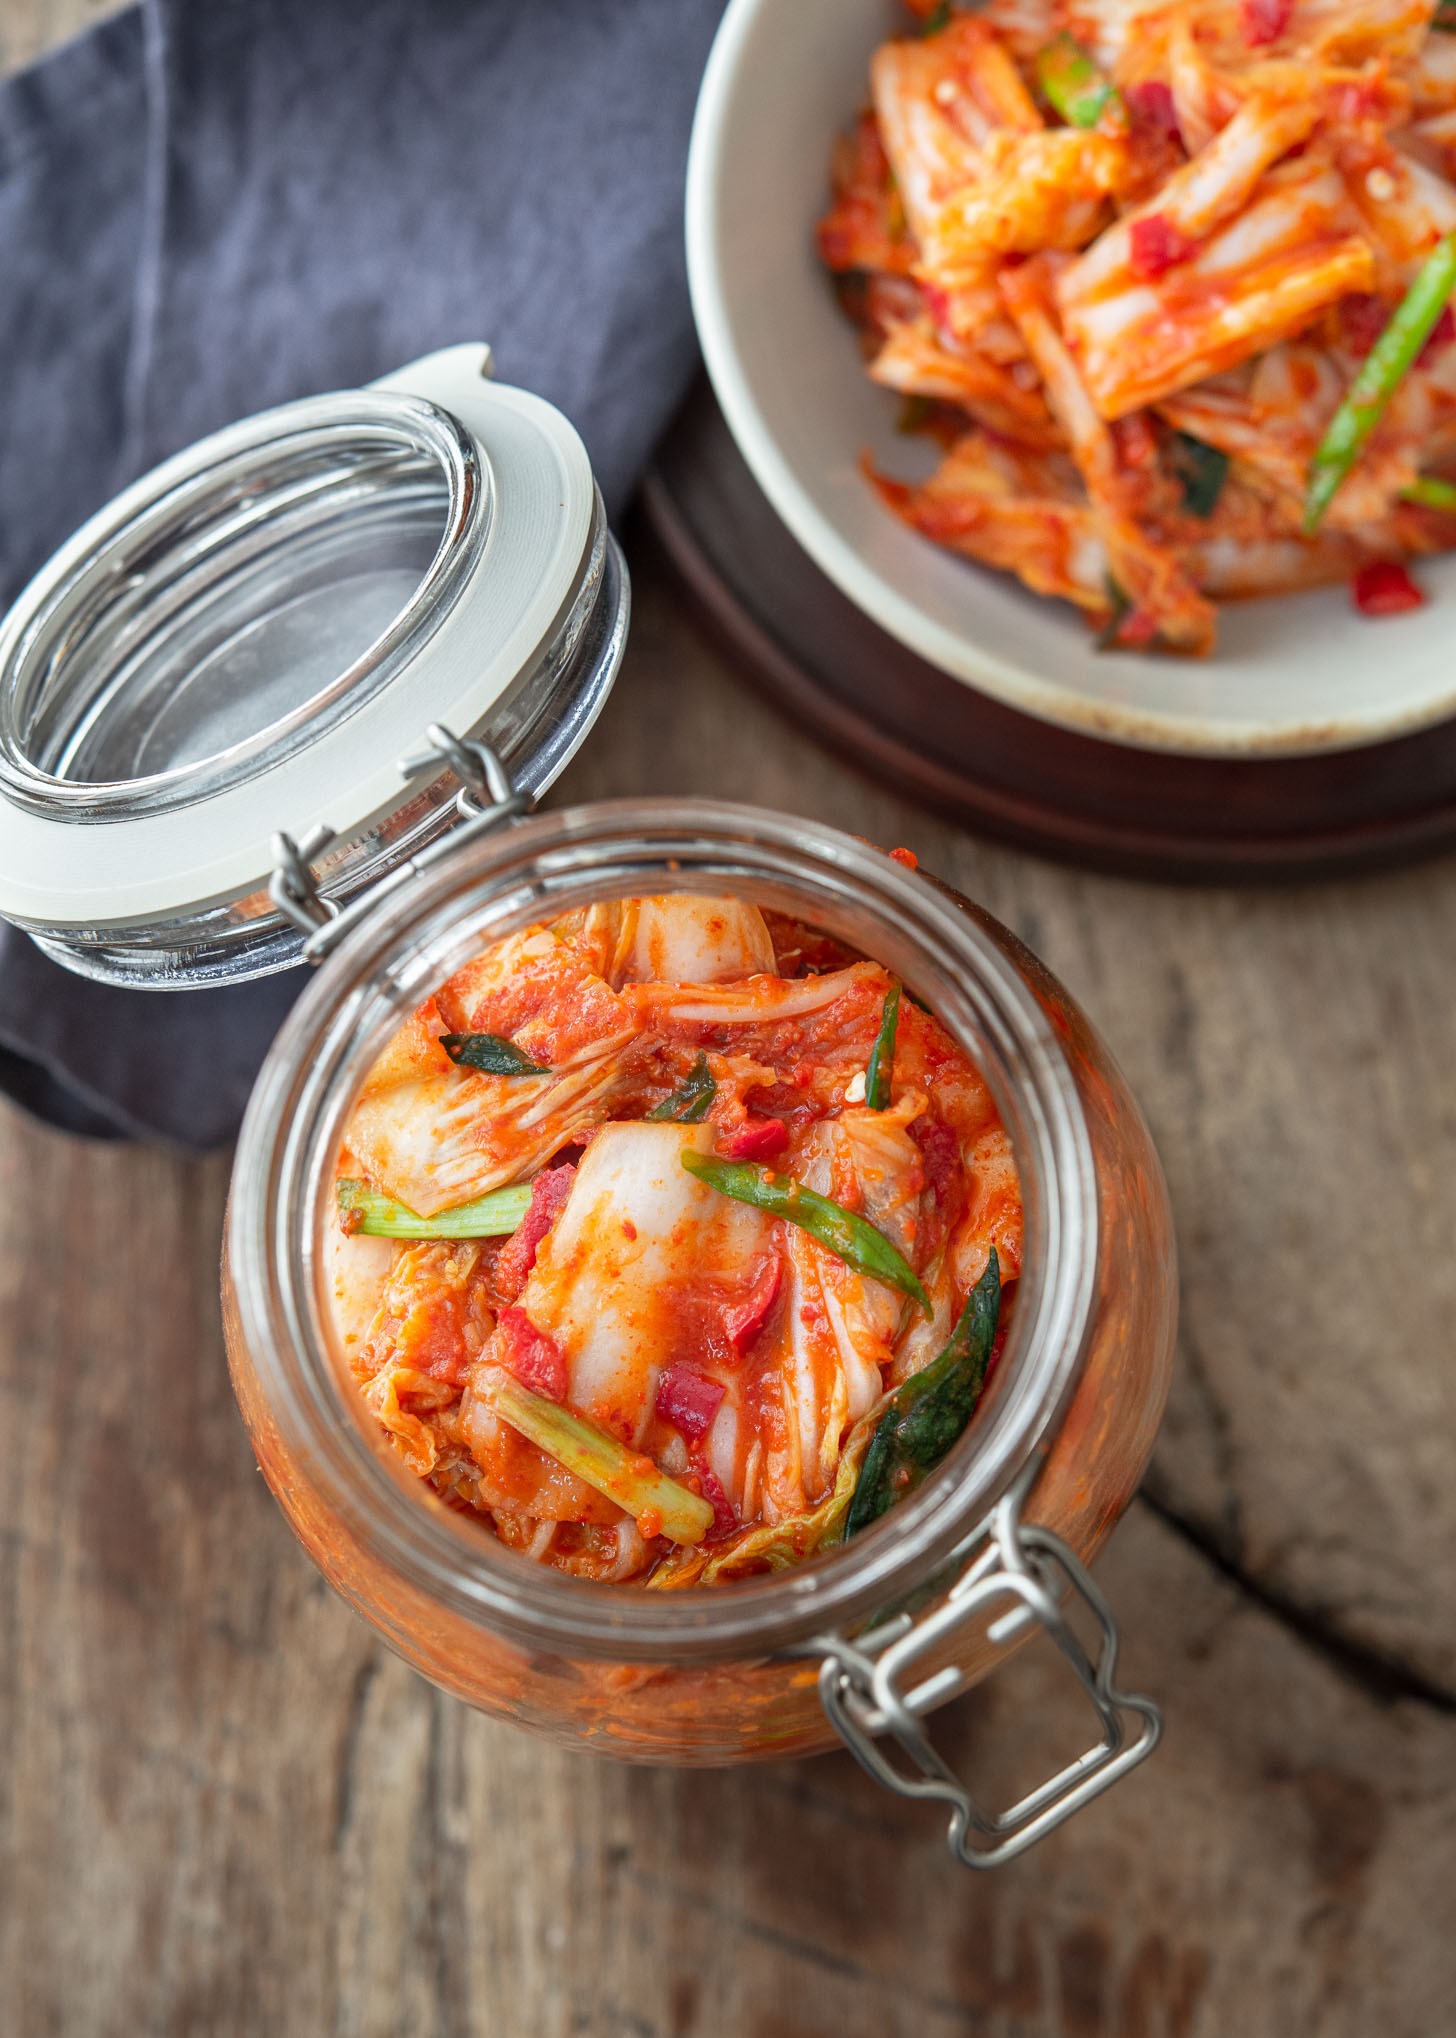 A jar of vegan kimchi is opened and showing the kimchi inside.